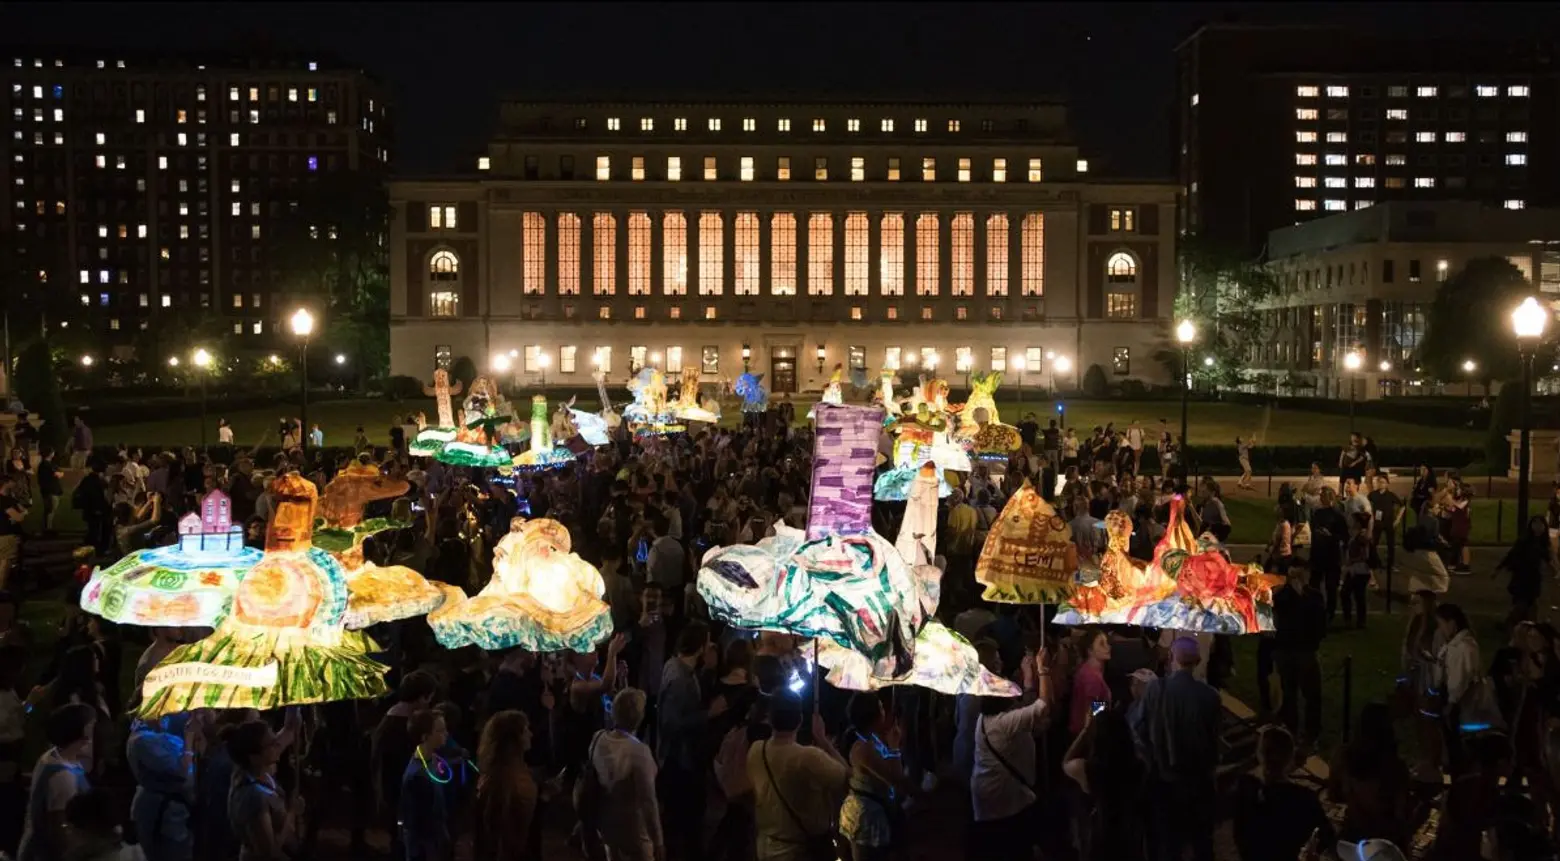 Moving ‘sculpture garden’ with glowing, handmade lanterns will light up Morningside Heights